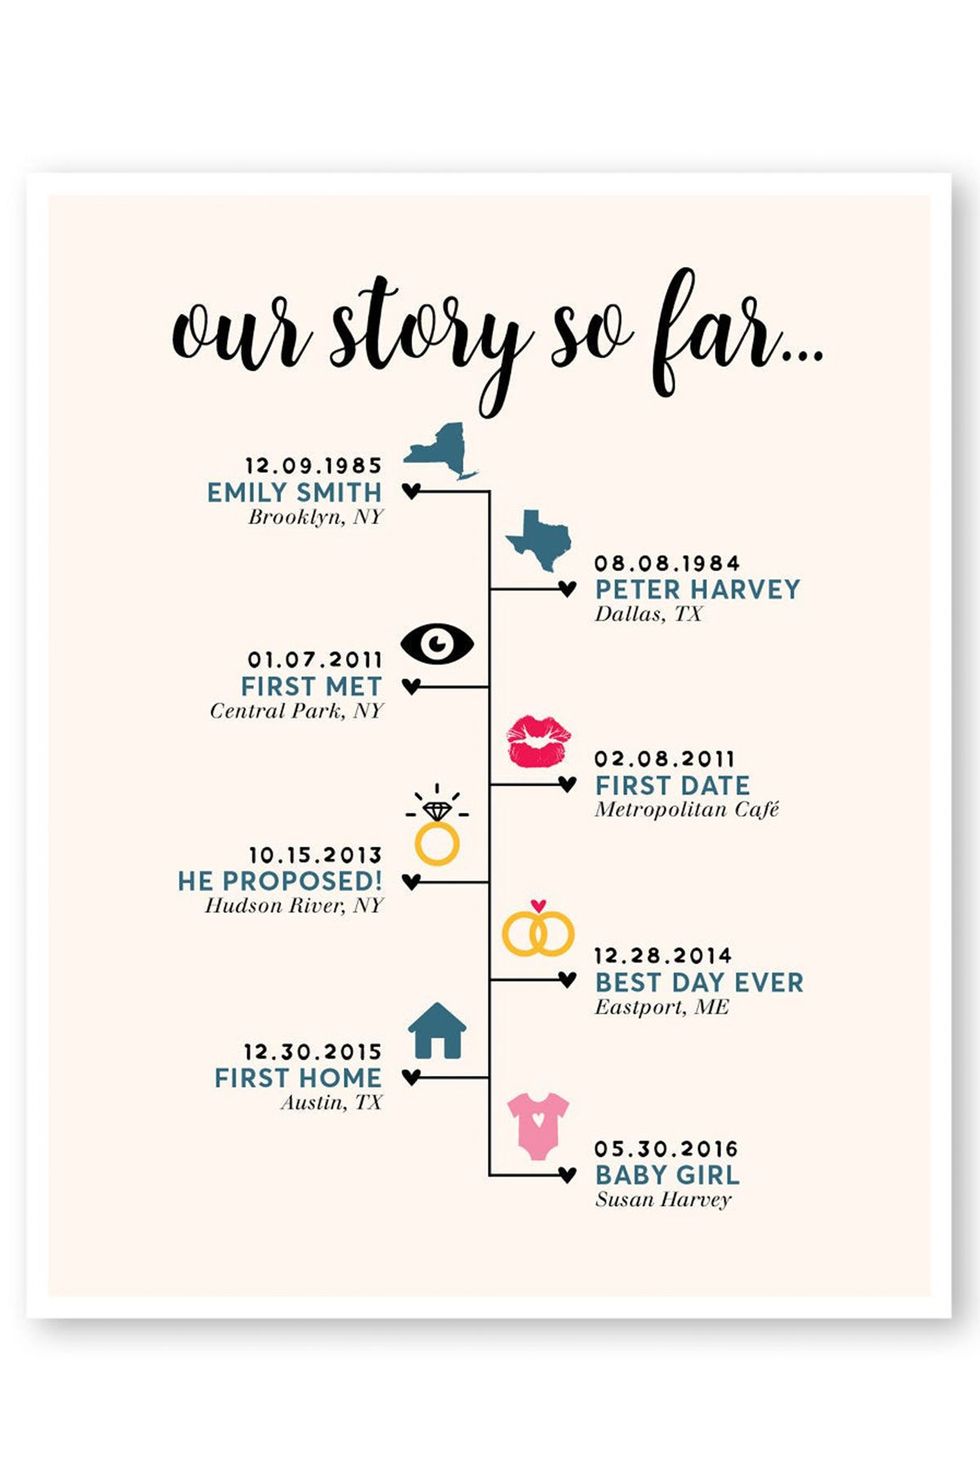 Our Story So Far Timeline